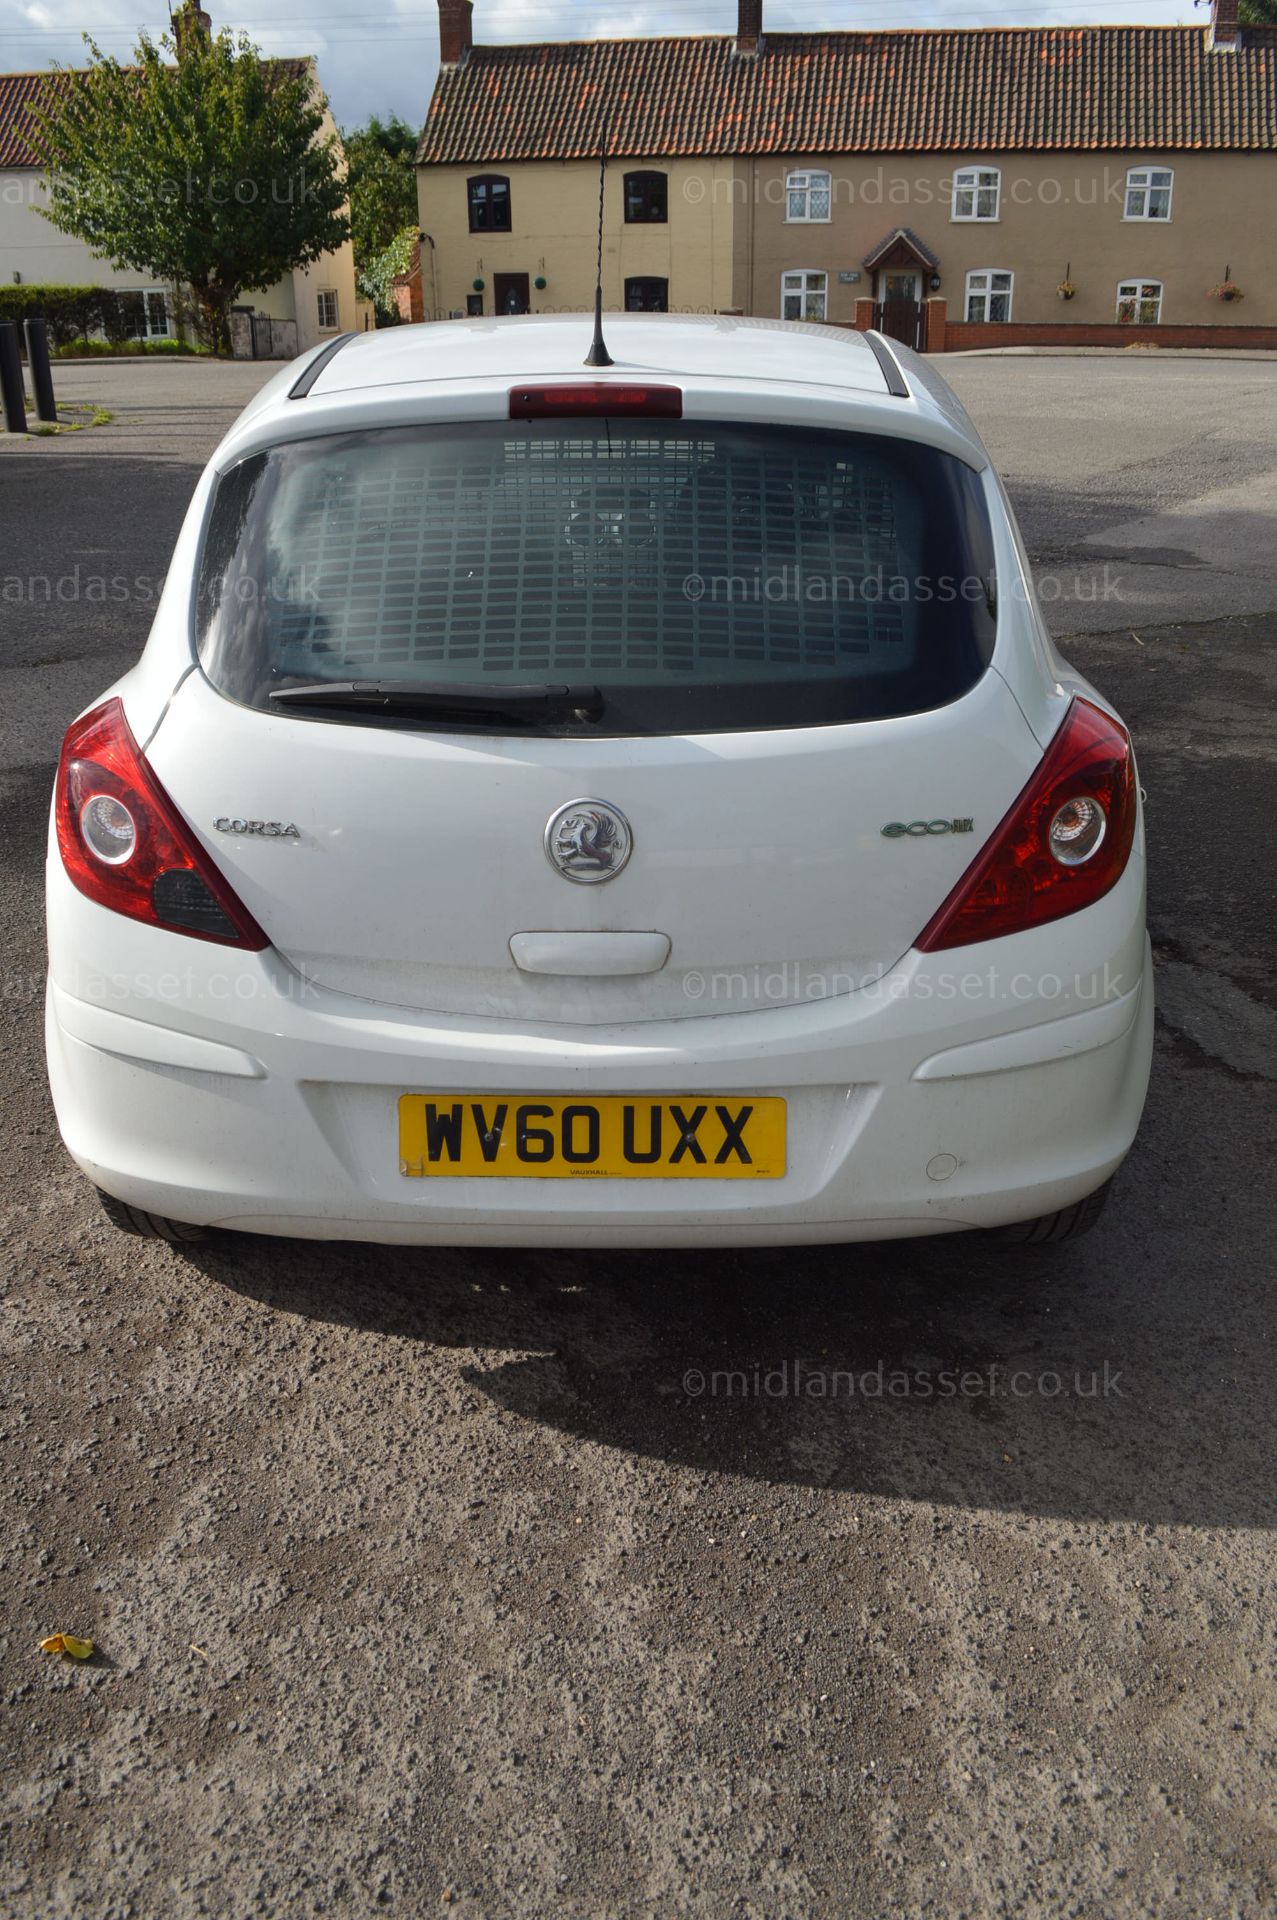 2010/60 REG VAUXHALL CORSA CDTI, SHOWING 1 OWNER, EX BT, FULL SERVICE HISTORY & LOW MILES! *NO VAT* - Image 5 of 14